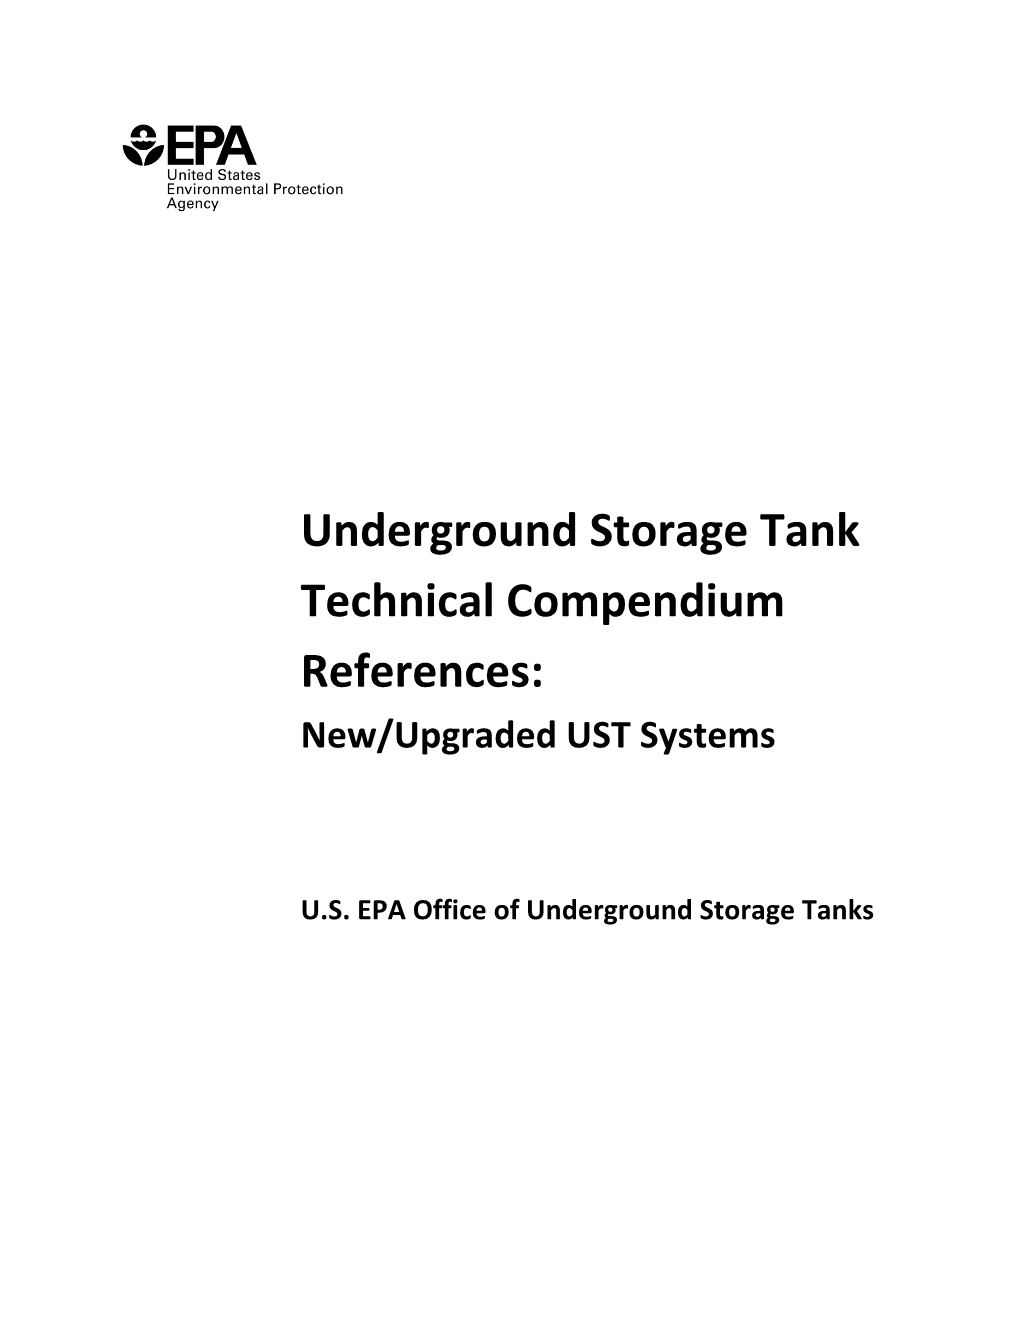 Underground Storage Tank Technical Compendium R Eferences: New/Upgraded UST Systems